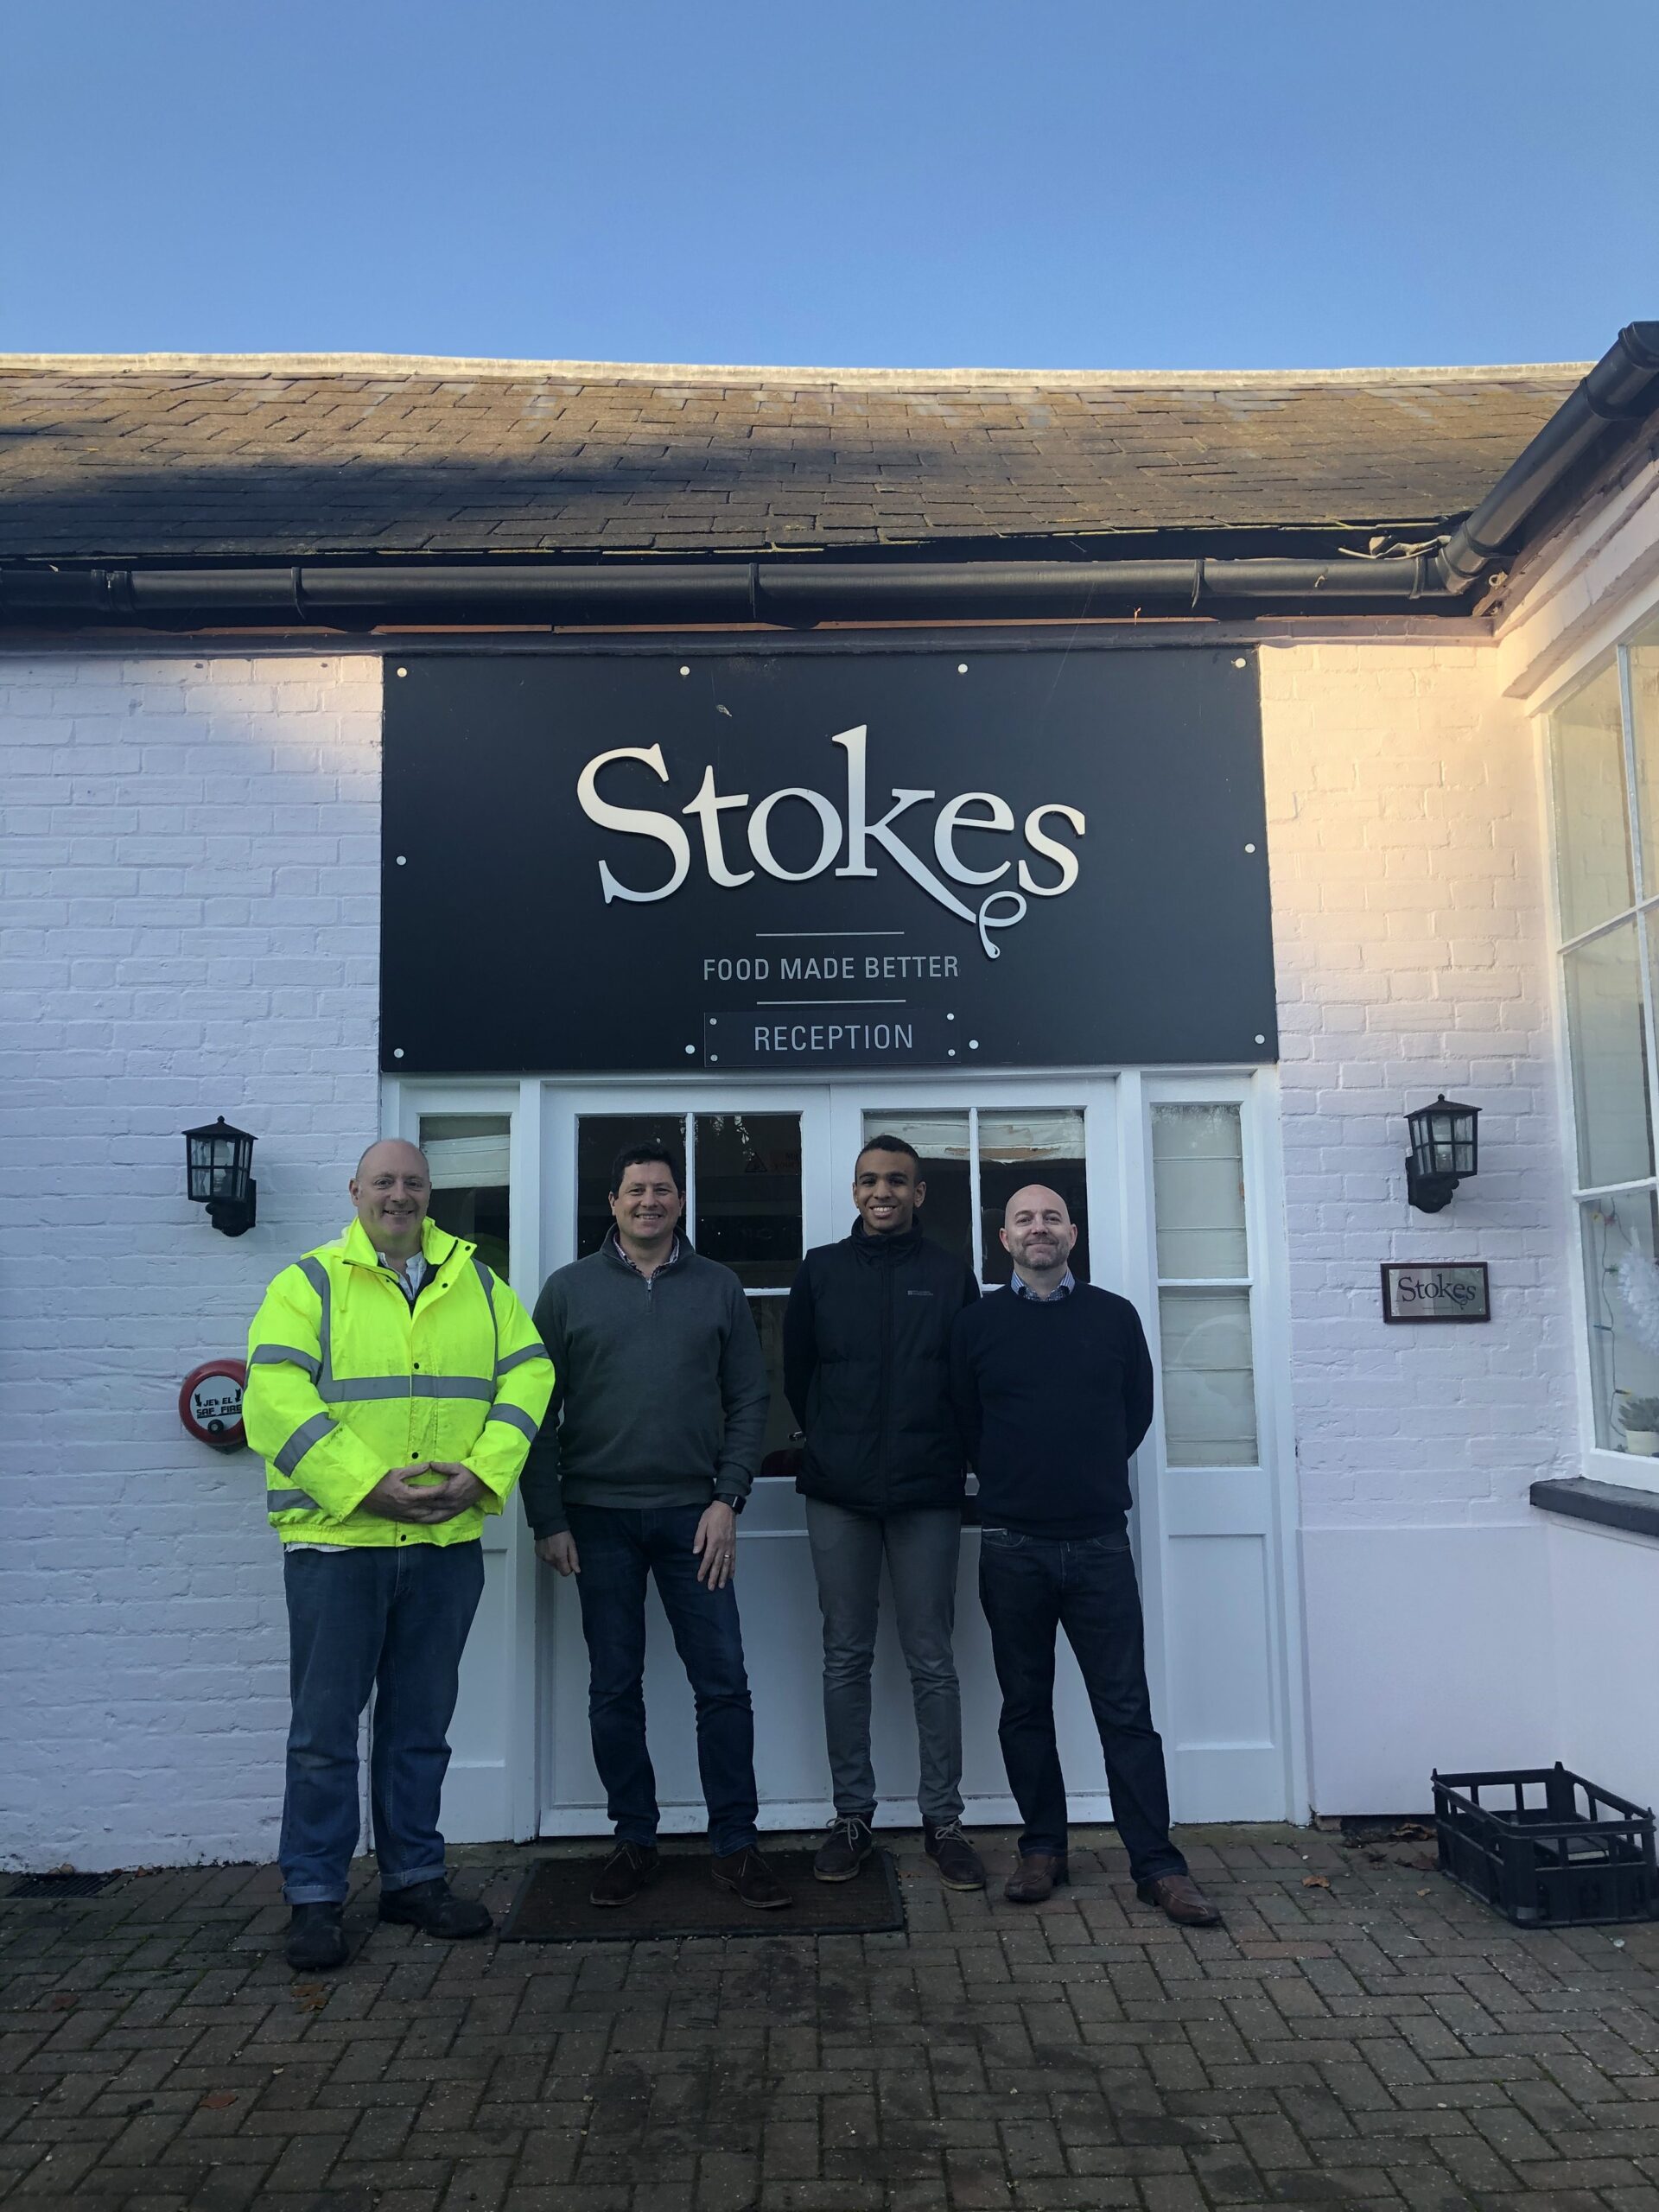 Stokes Sauces recycling